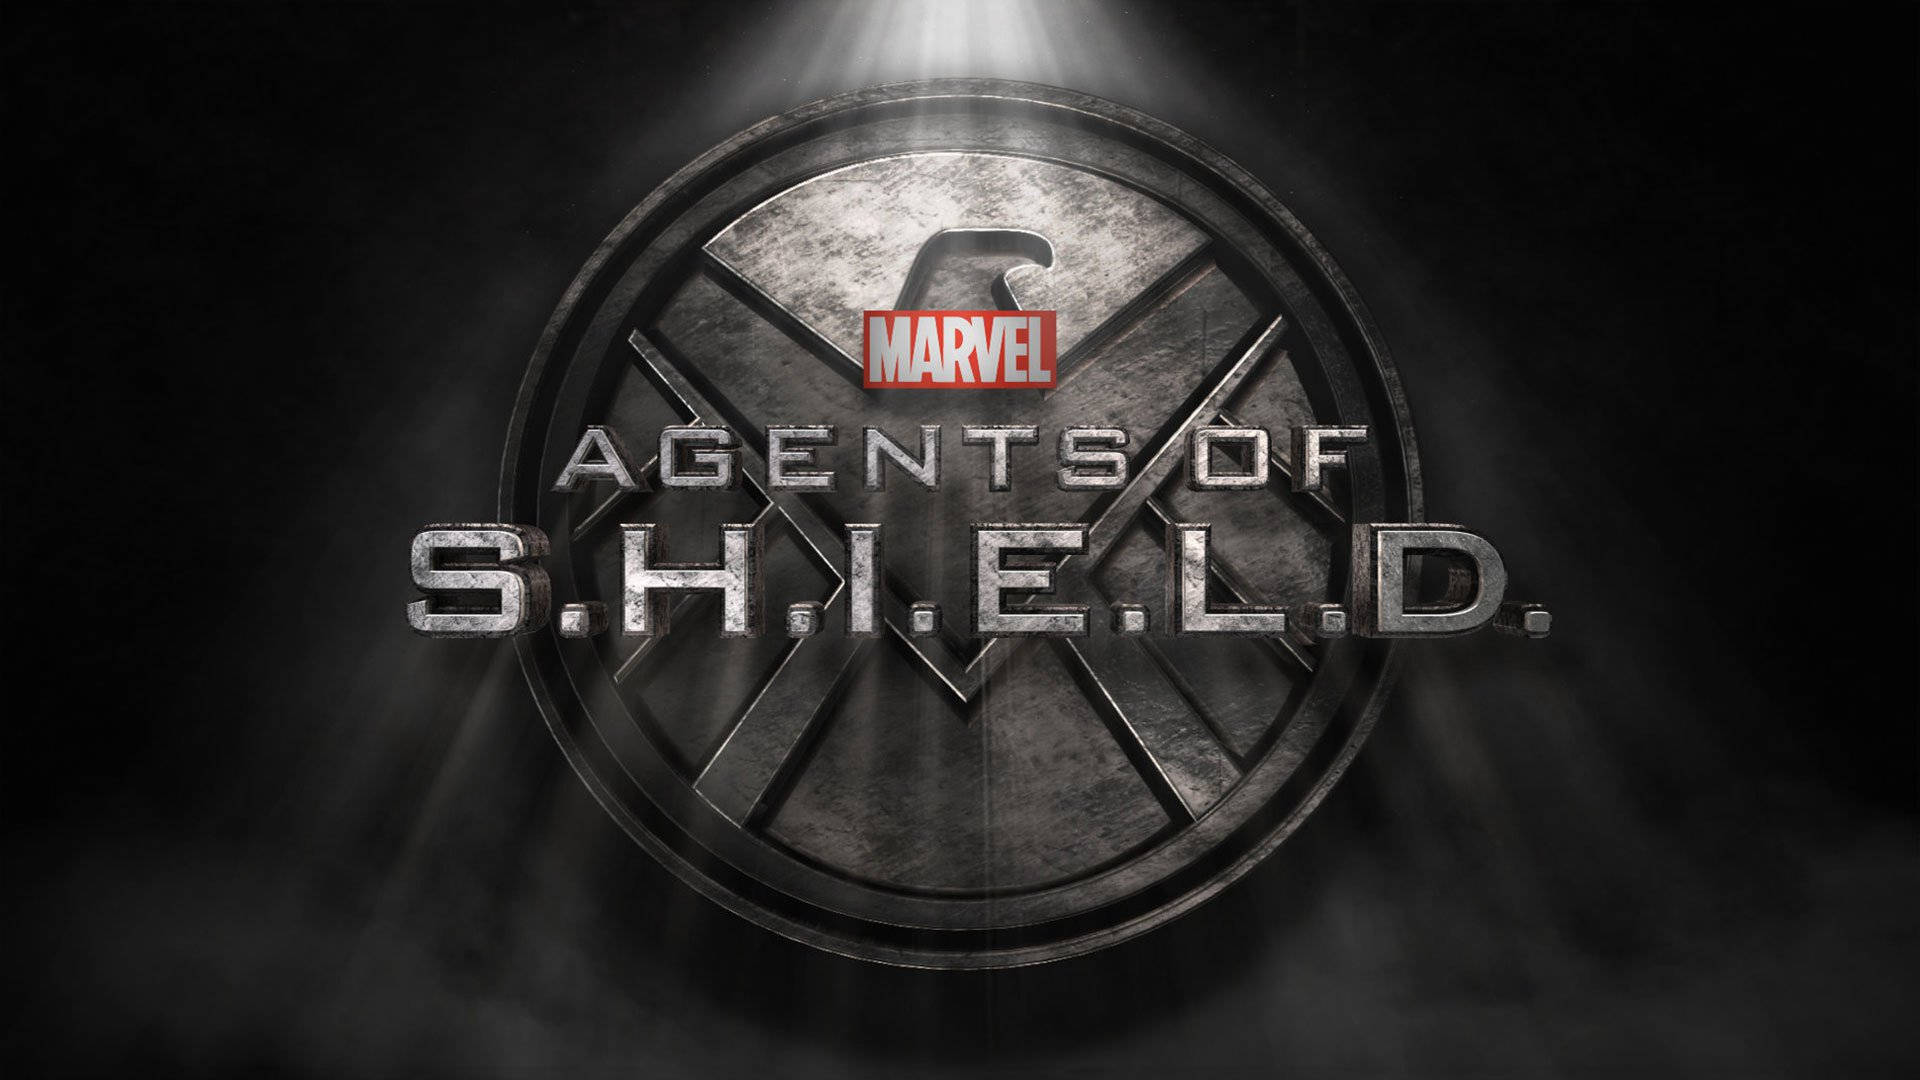 Official Marvel Agents Of Shield Logo Graphic Art Wallpaper